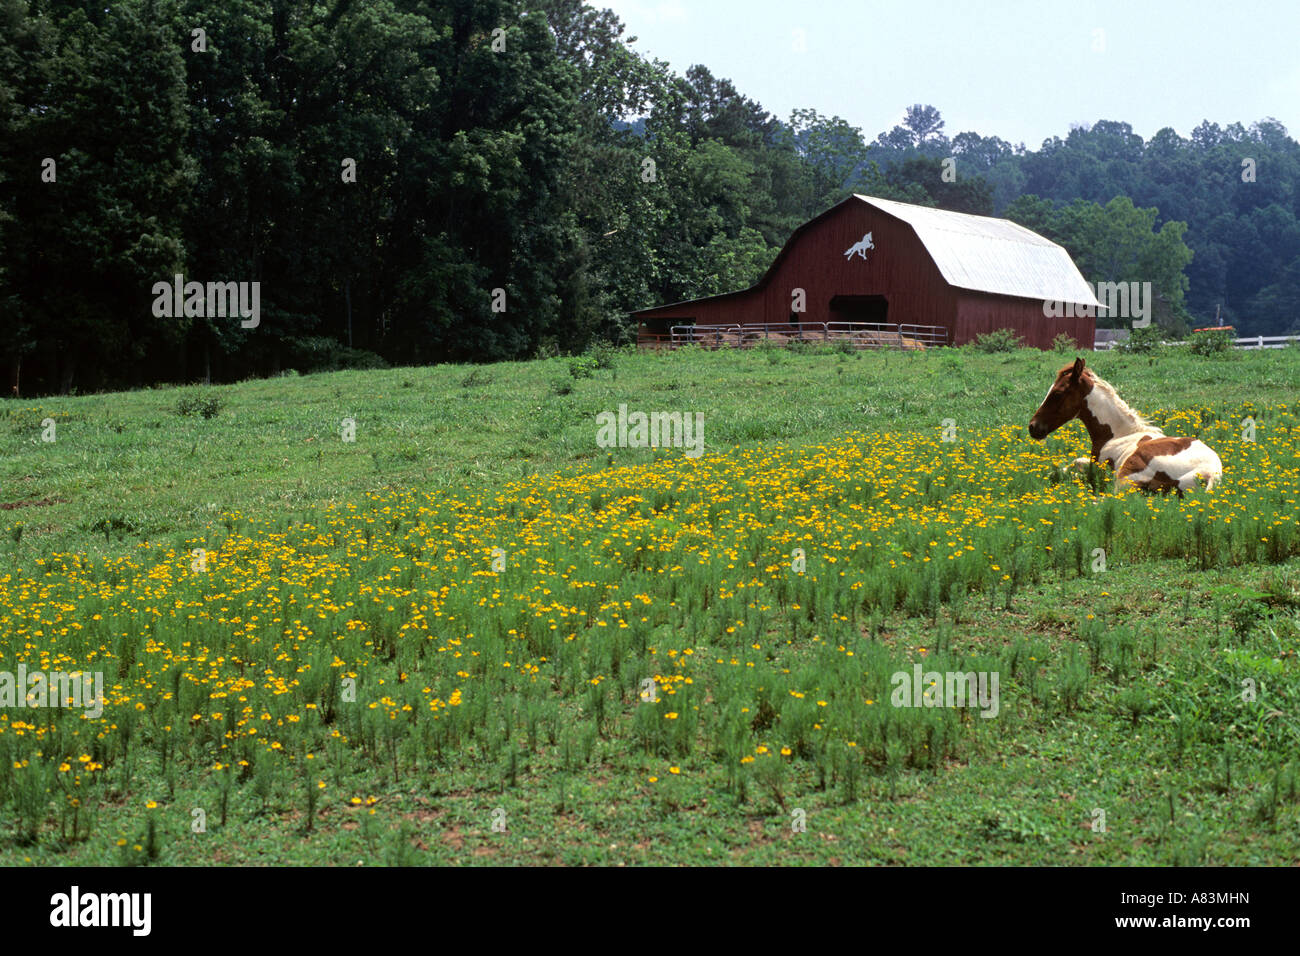 A pinto colt lays in a field of yellow flowers on a farm in rural Tennessee Stock Photo